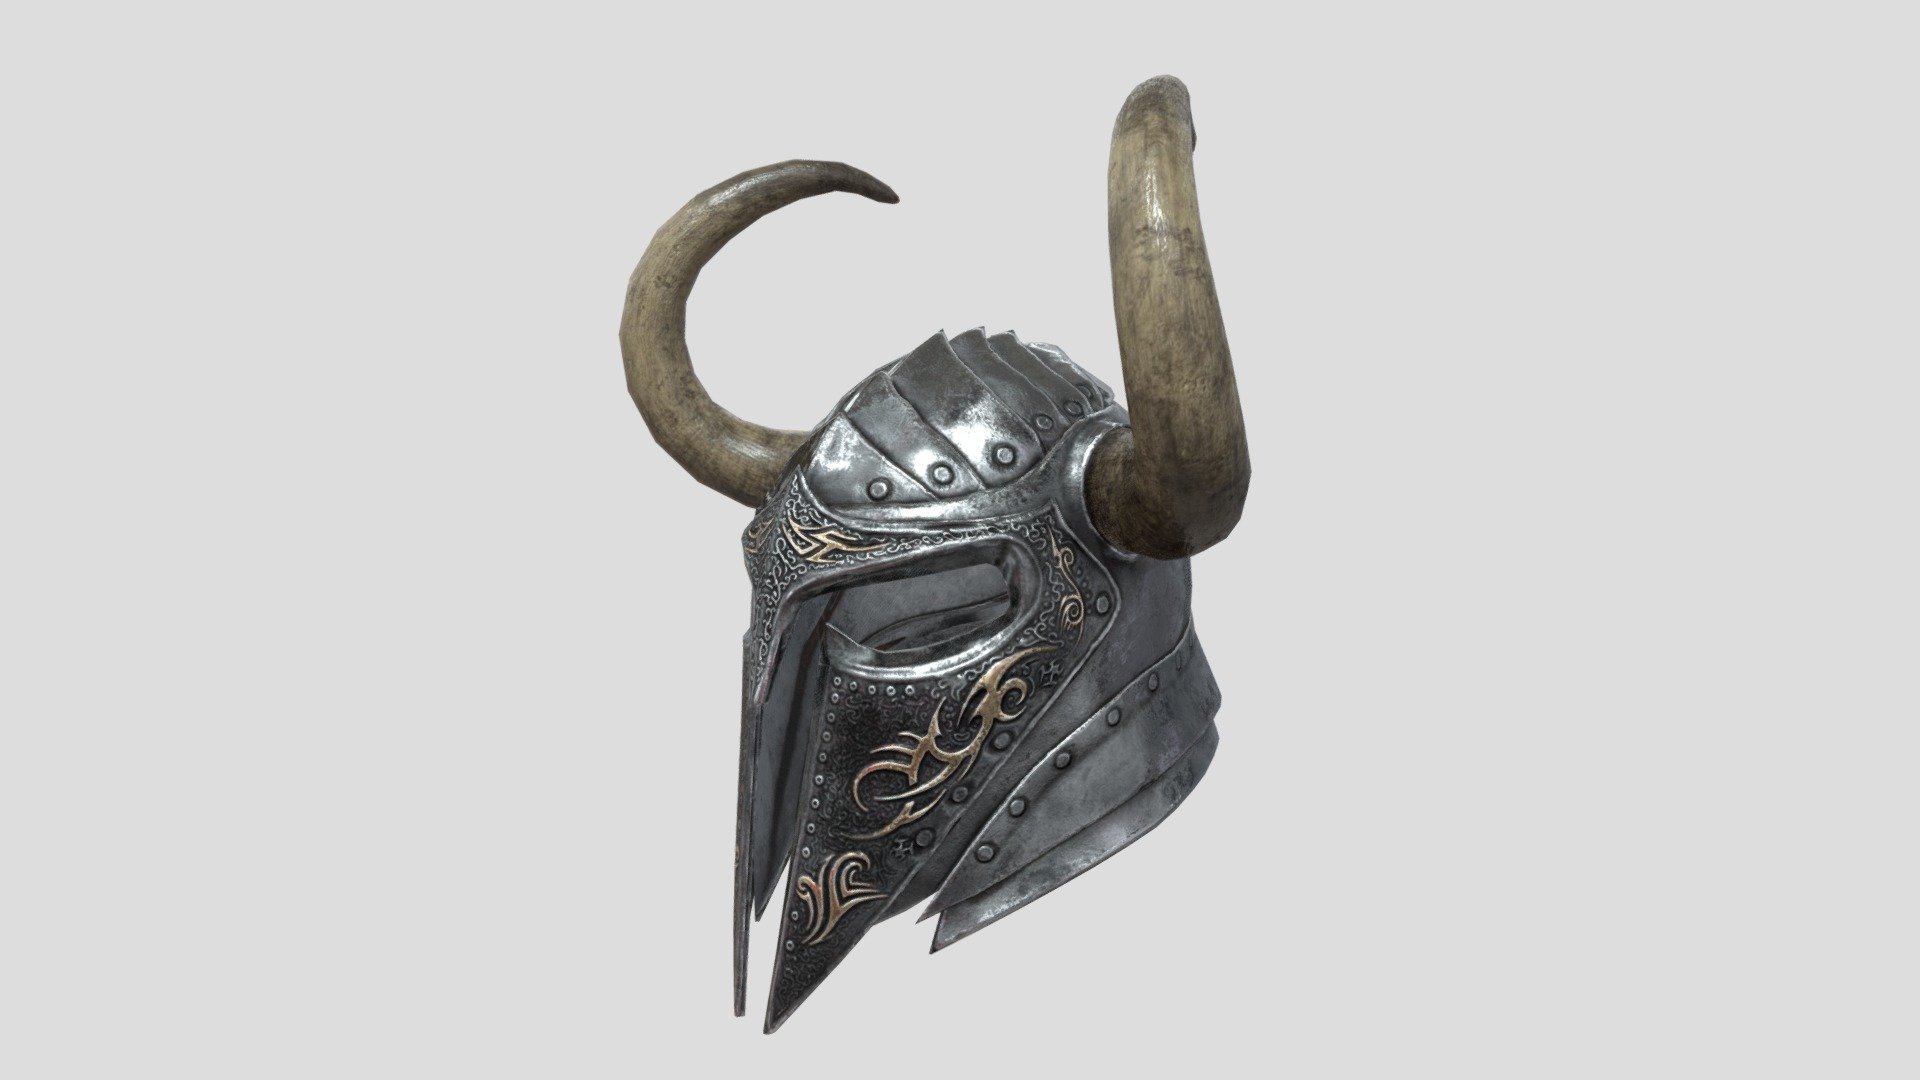 KNIGHT BATTLE HELMET is an optimized model with excellent texturing for best outcome.

The model has an optimized low poly mesh with the greatest possible number of simplifications that do not affect photo-realism but can help to simplify it, thus lightening your scene and allowing for using this model in real-time 3d applications.

In this product, all objects are ERROR-FREE. All LEGAL Geometry. Subdivisions are not required for this product. Real-world accurate model.


Format Type



3ds Max 2017 (Standard Material)

FBX

OBJ

3DS


Texture Type



Diffuse

Specular

Glossiness

Normal

Ambient Occlusion

You might need to re-assign textures map to model in your relevant software

You might need to flip green channel of Normal map according to your relevant softwar - KNIGHT BATTLE HELMET - Buy Royalty Free 3D model by luxe3dworld 3d model